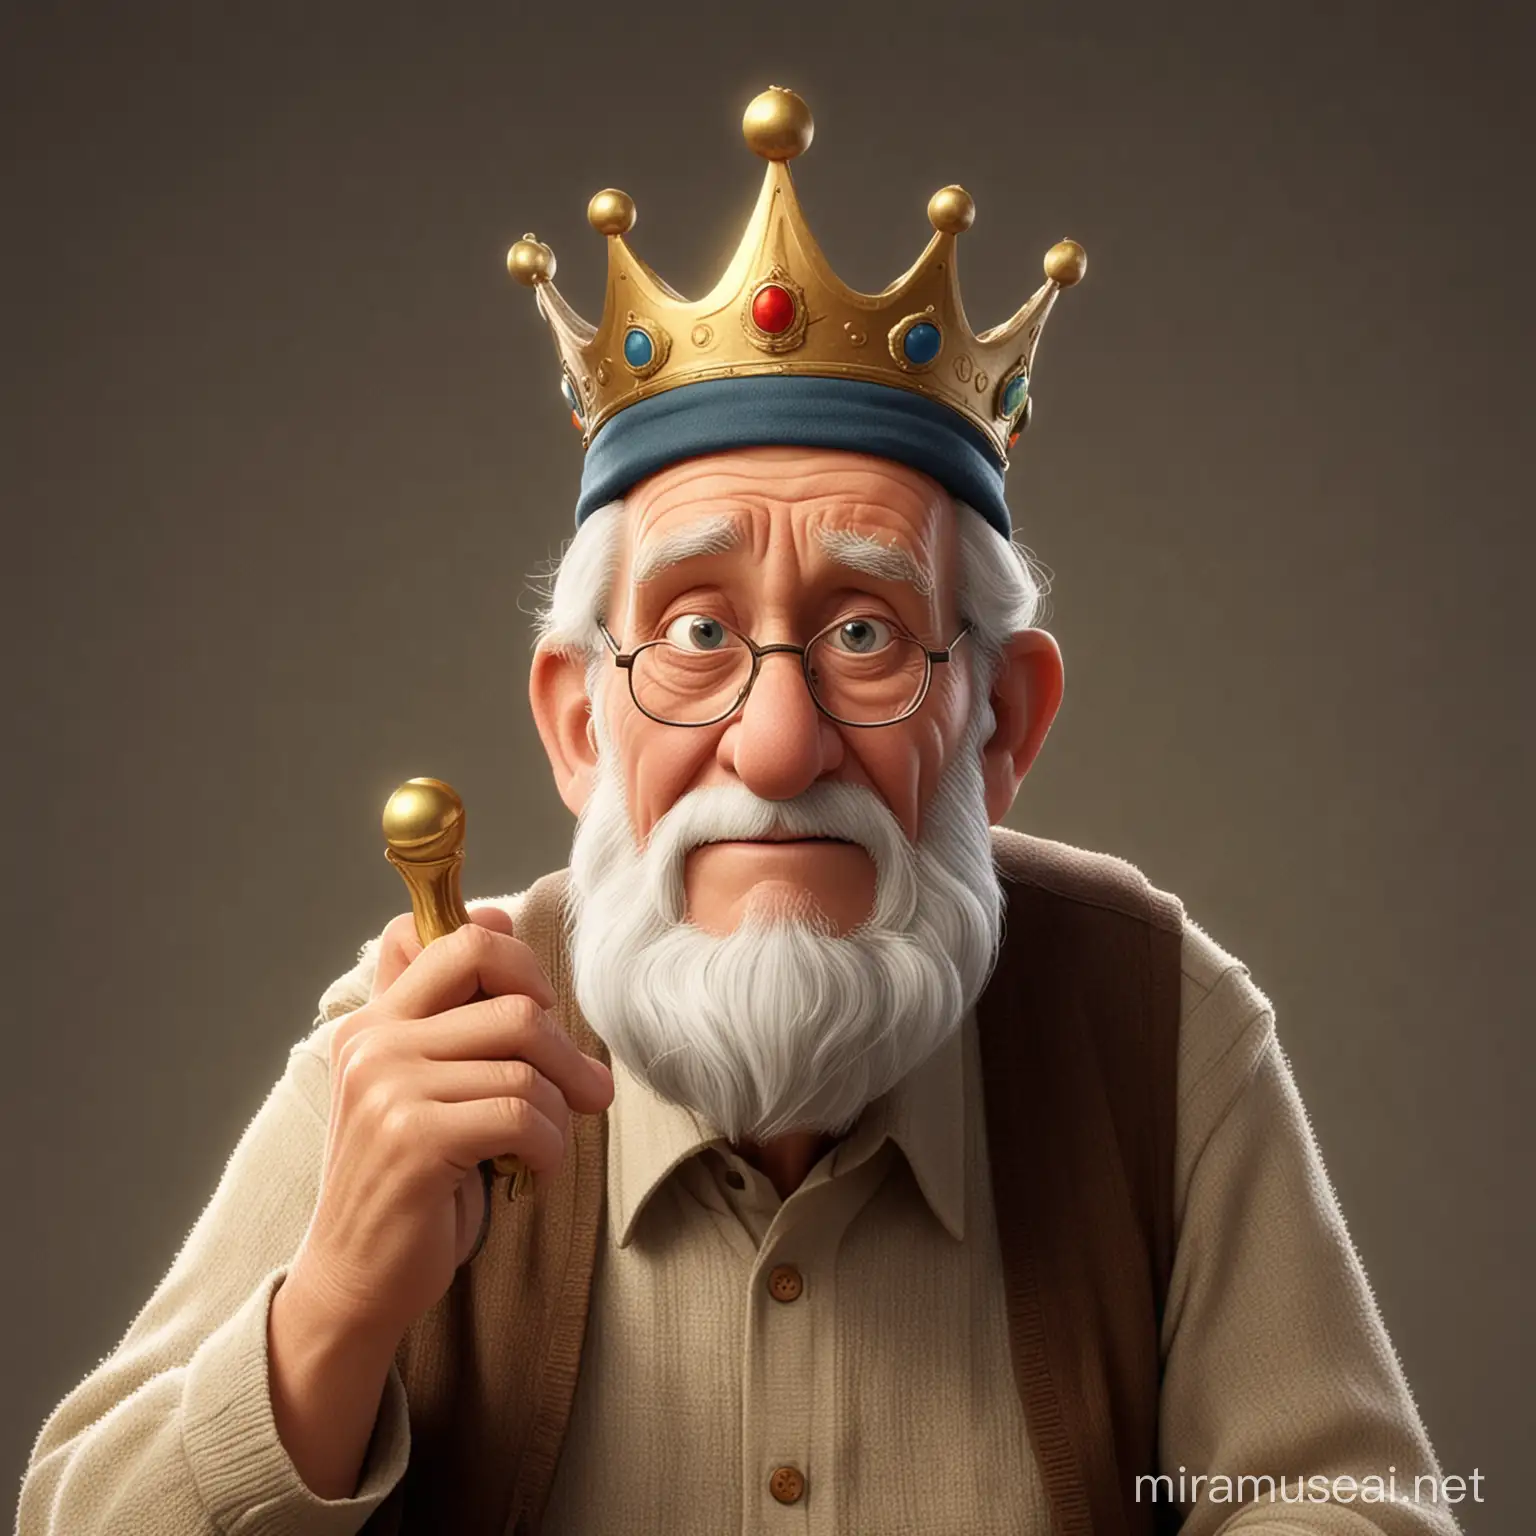 a old man thinking to call 110 with a  crown in his hand ,disney pixar style